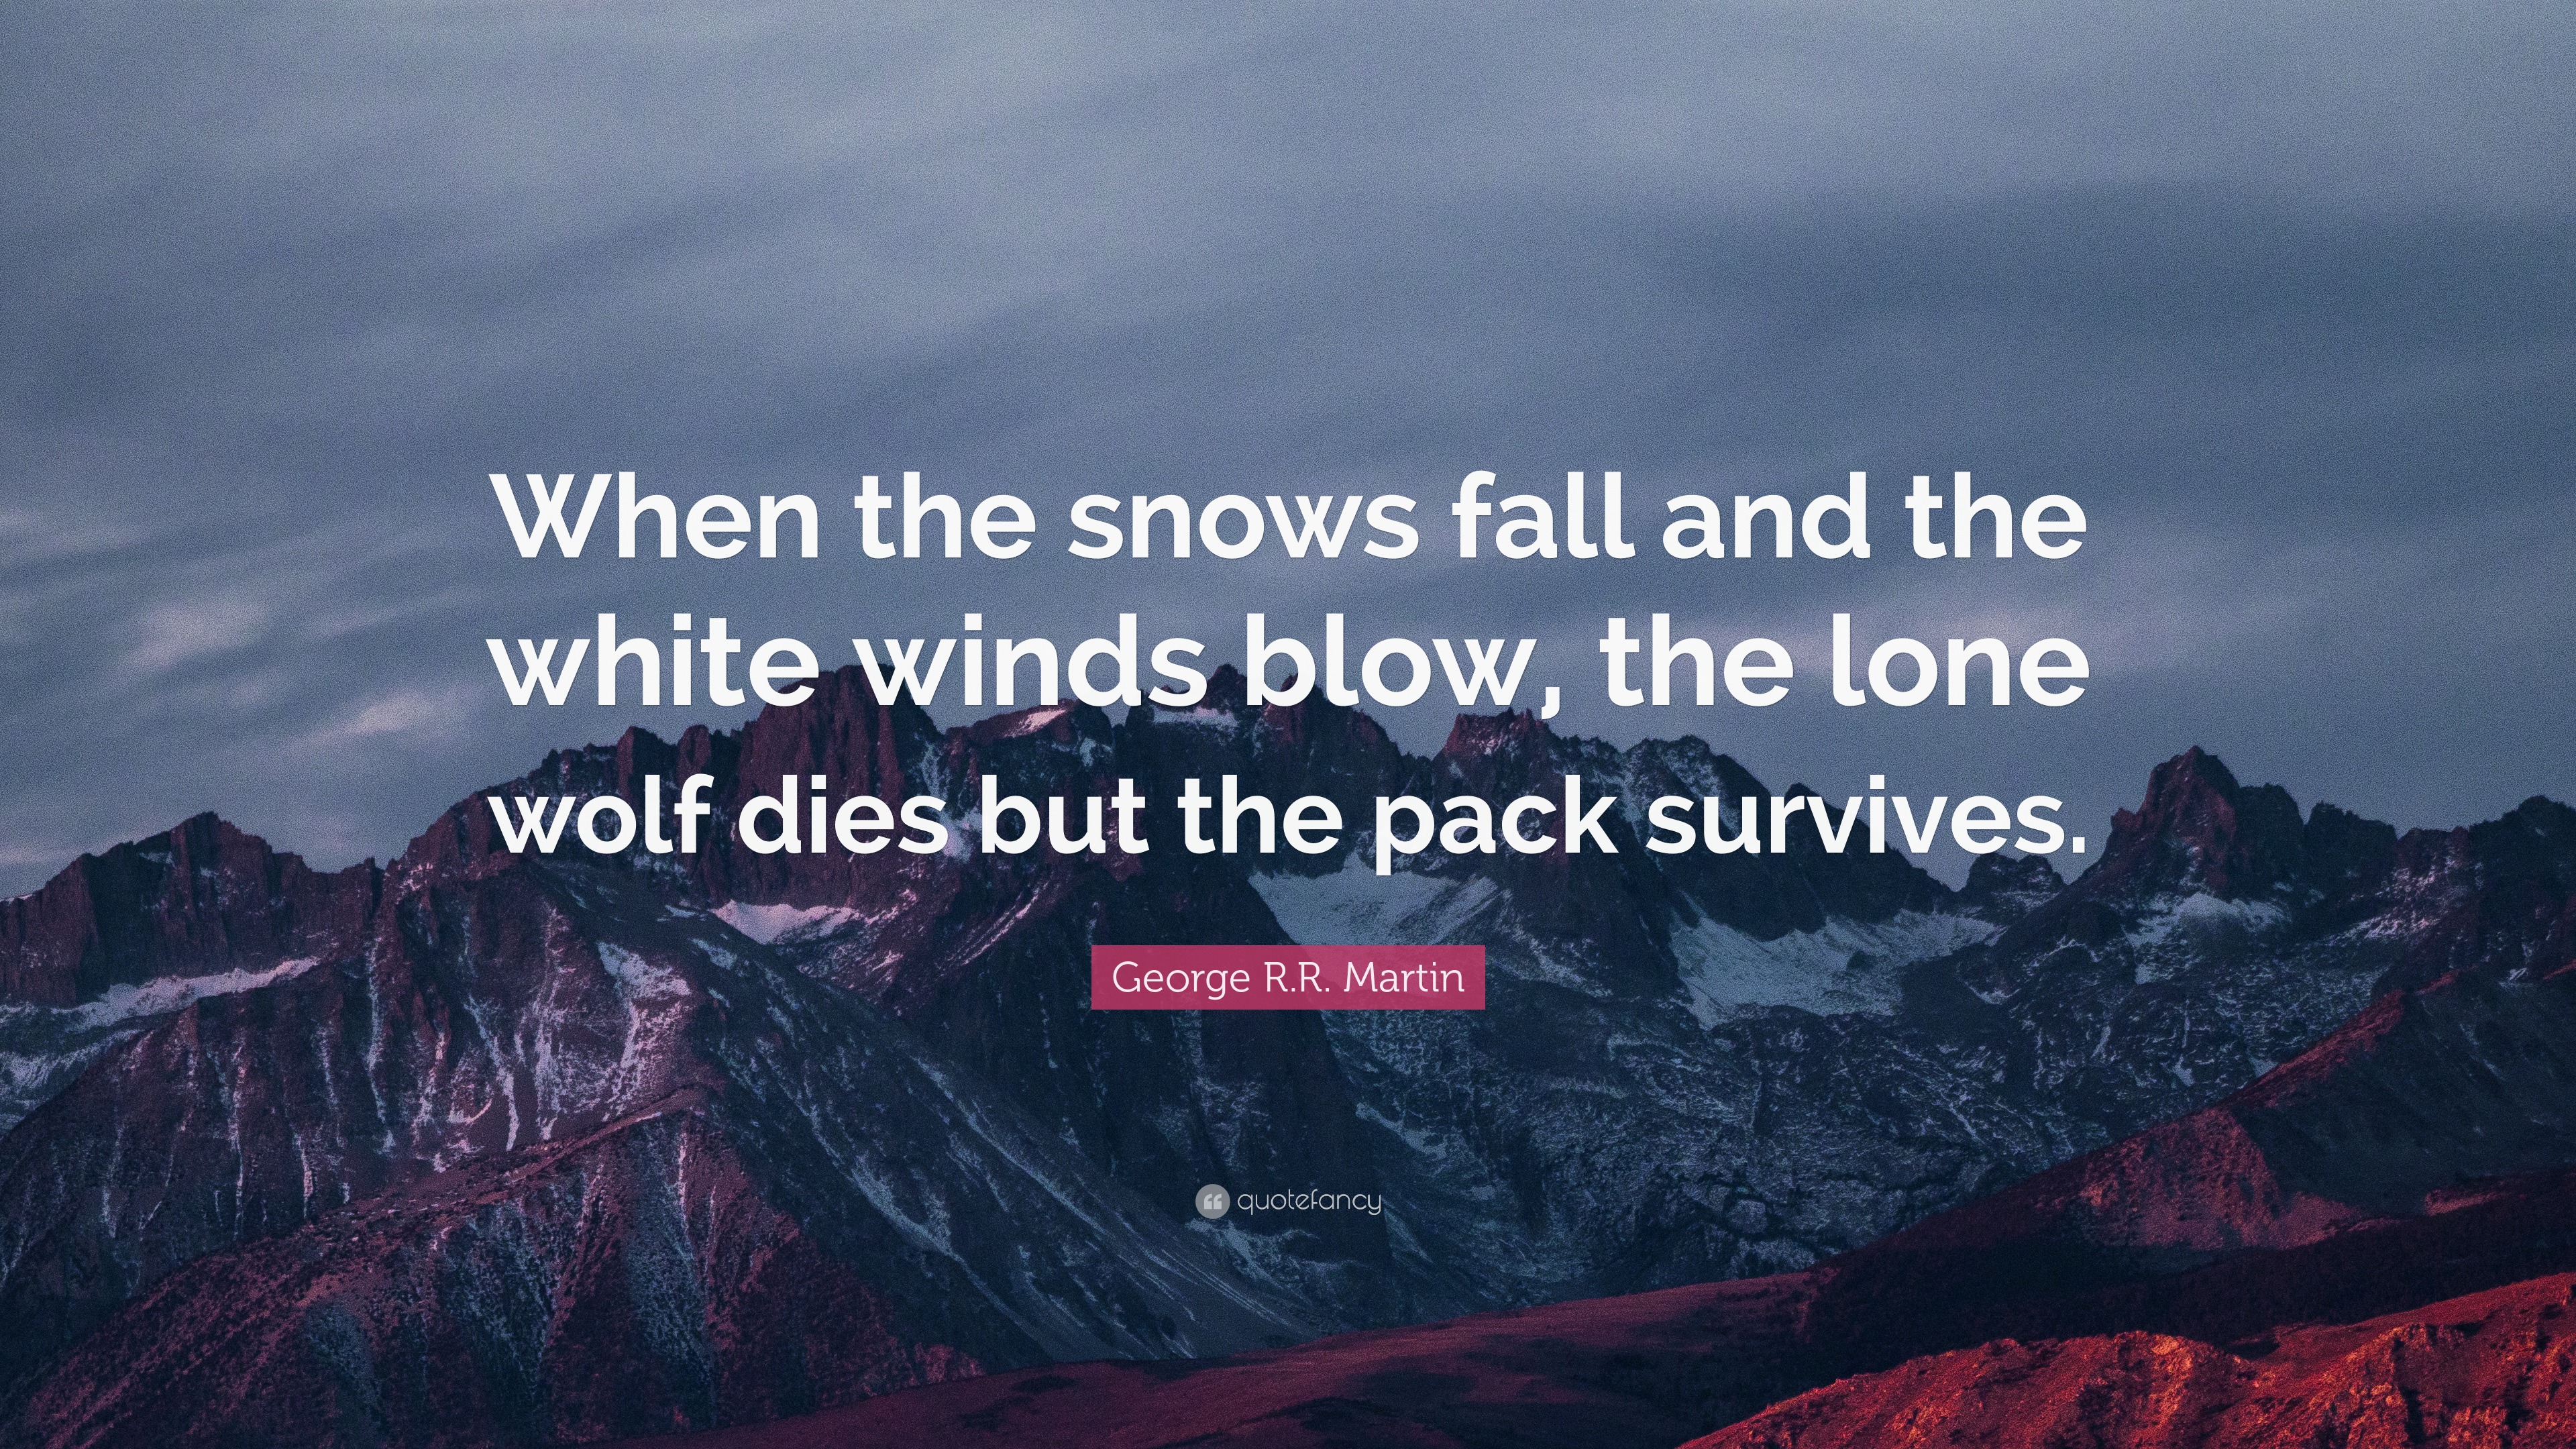 the lone wolf dies but the pack survives